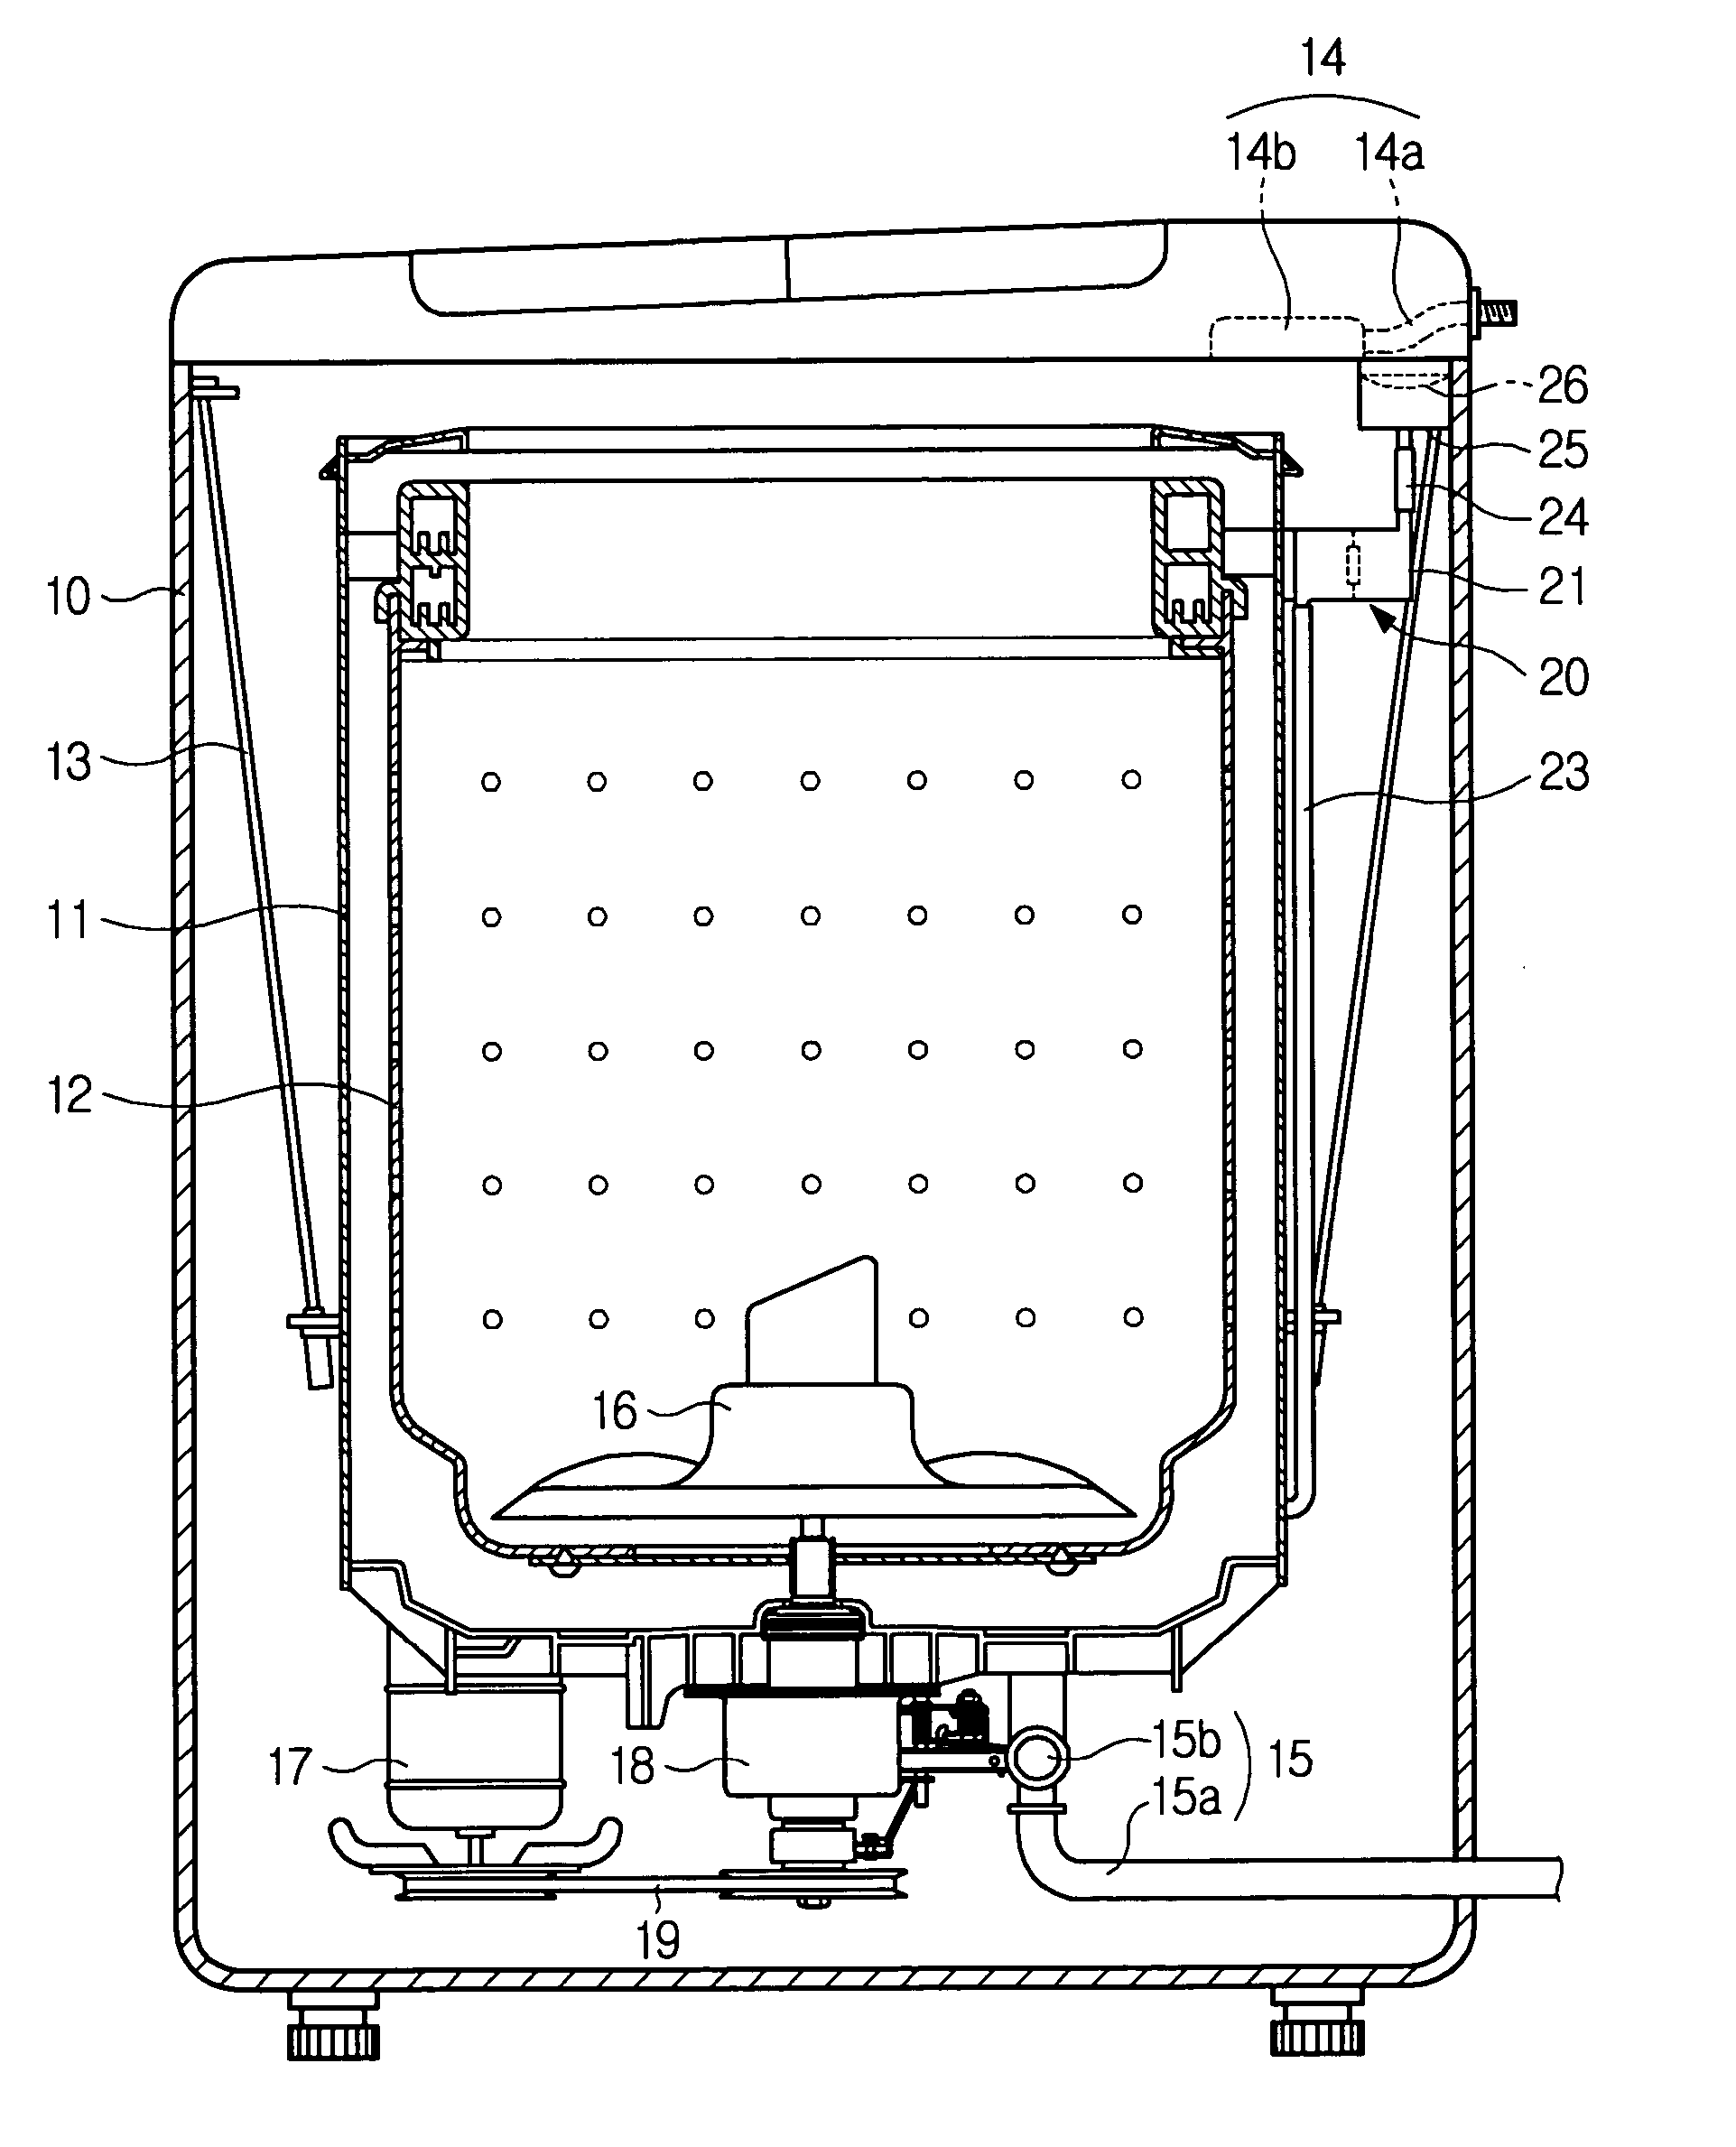 Washing machine with detection device